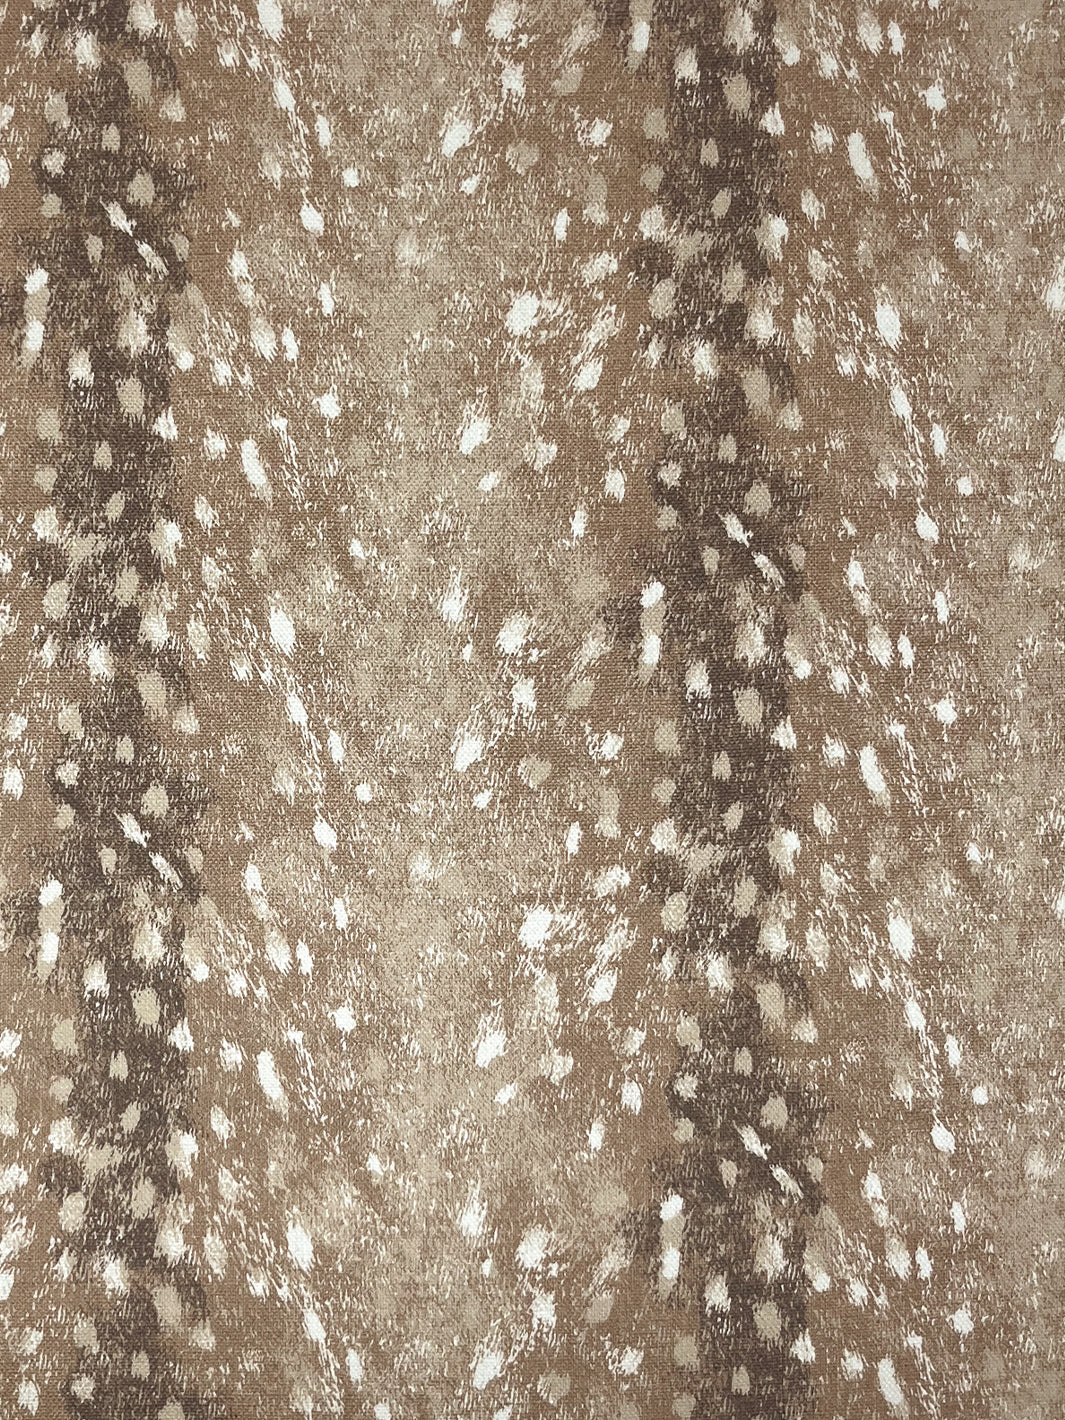 'Deer' Linen Fabric by Nathan Turner - Brown